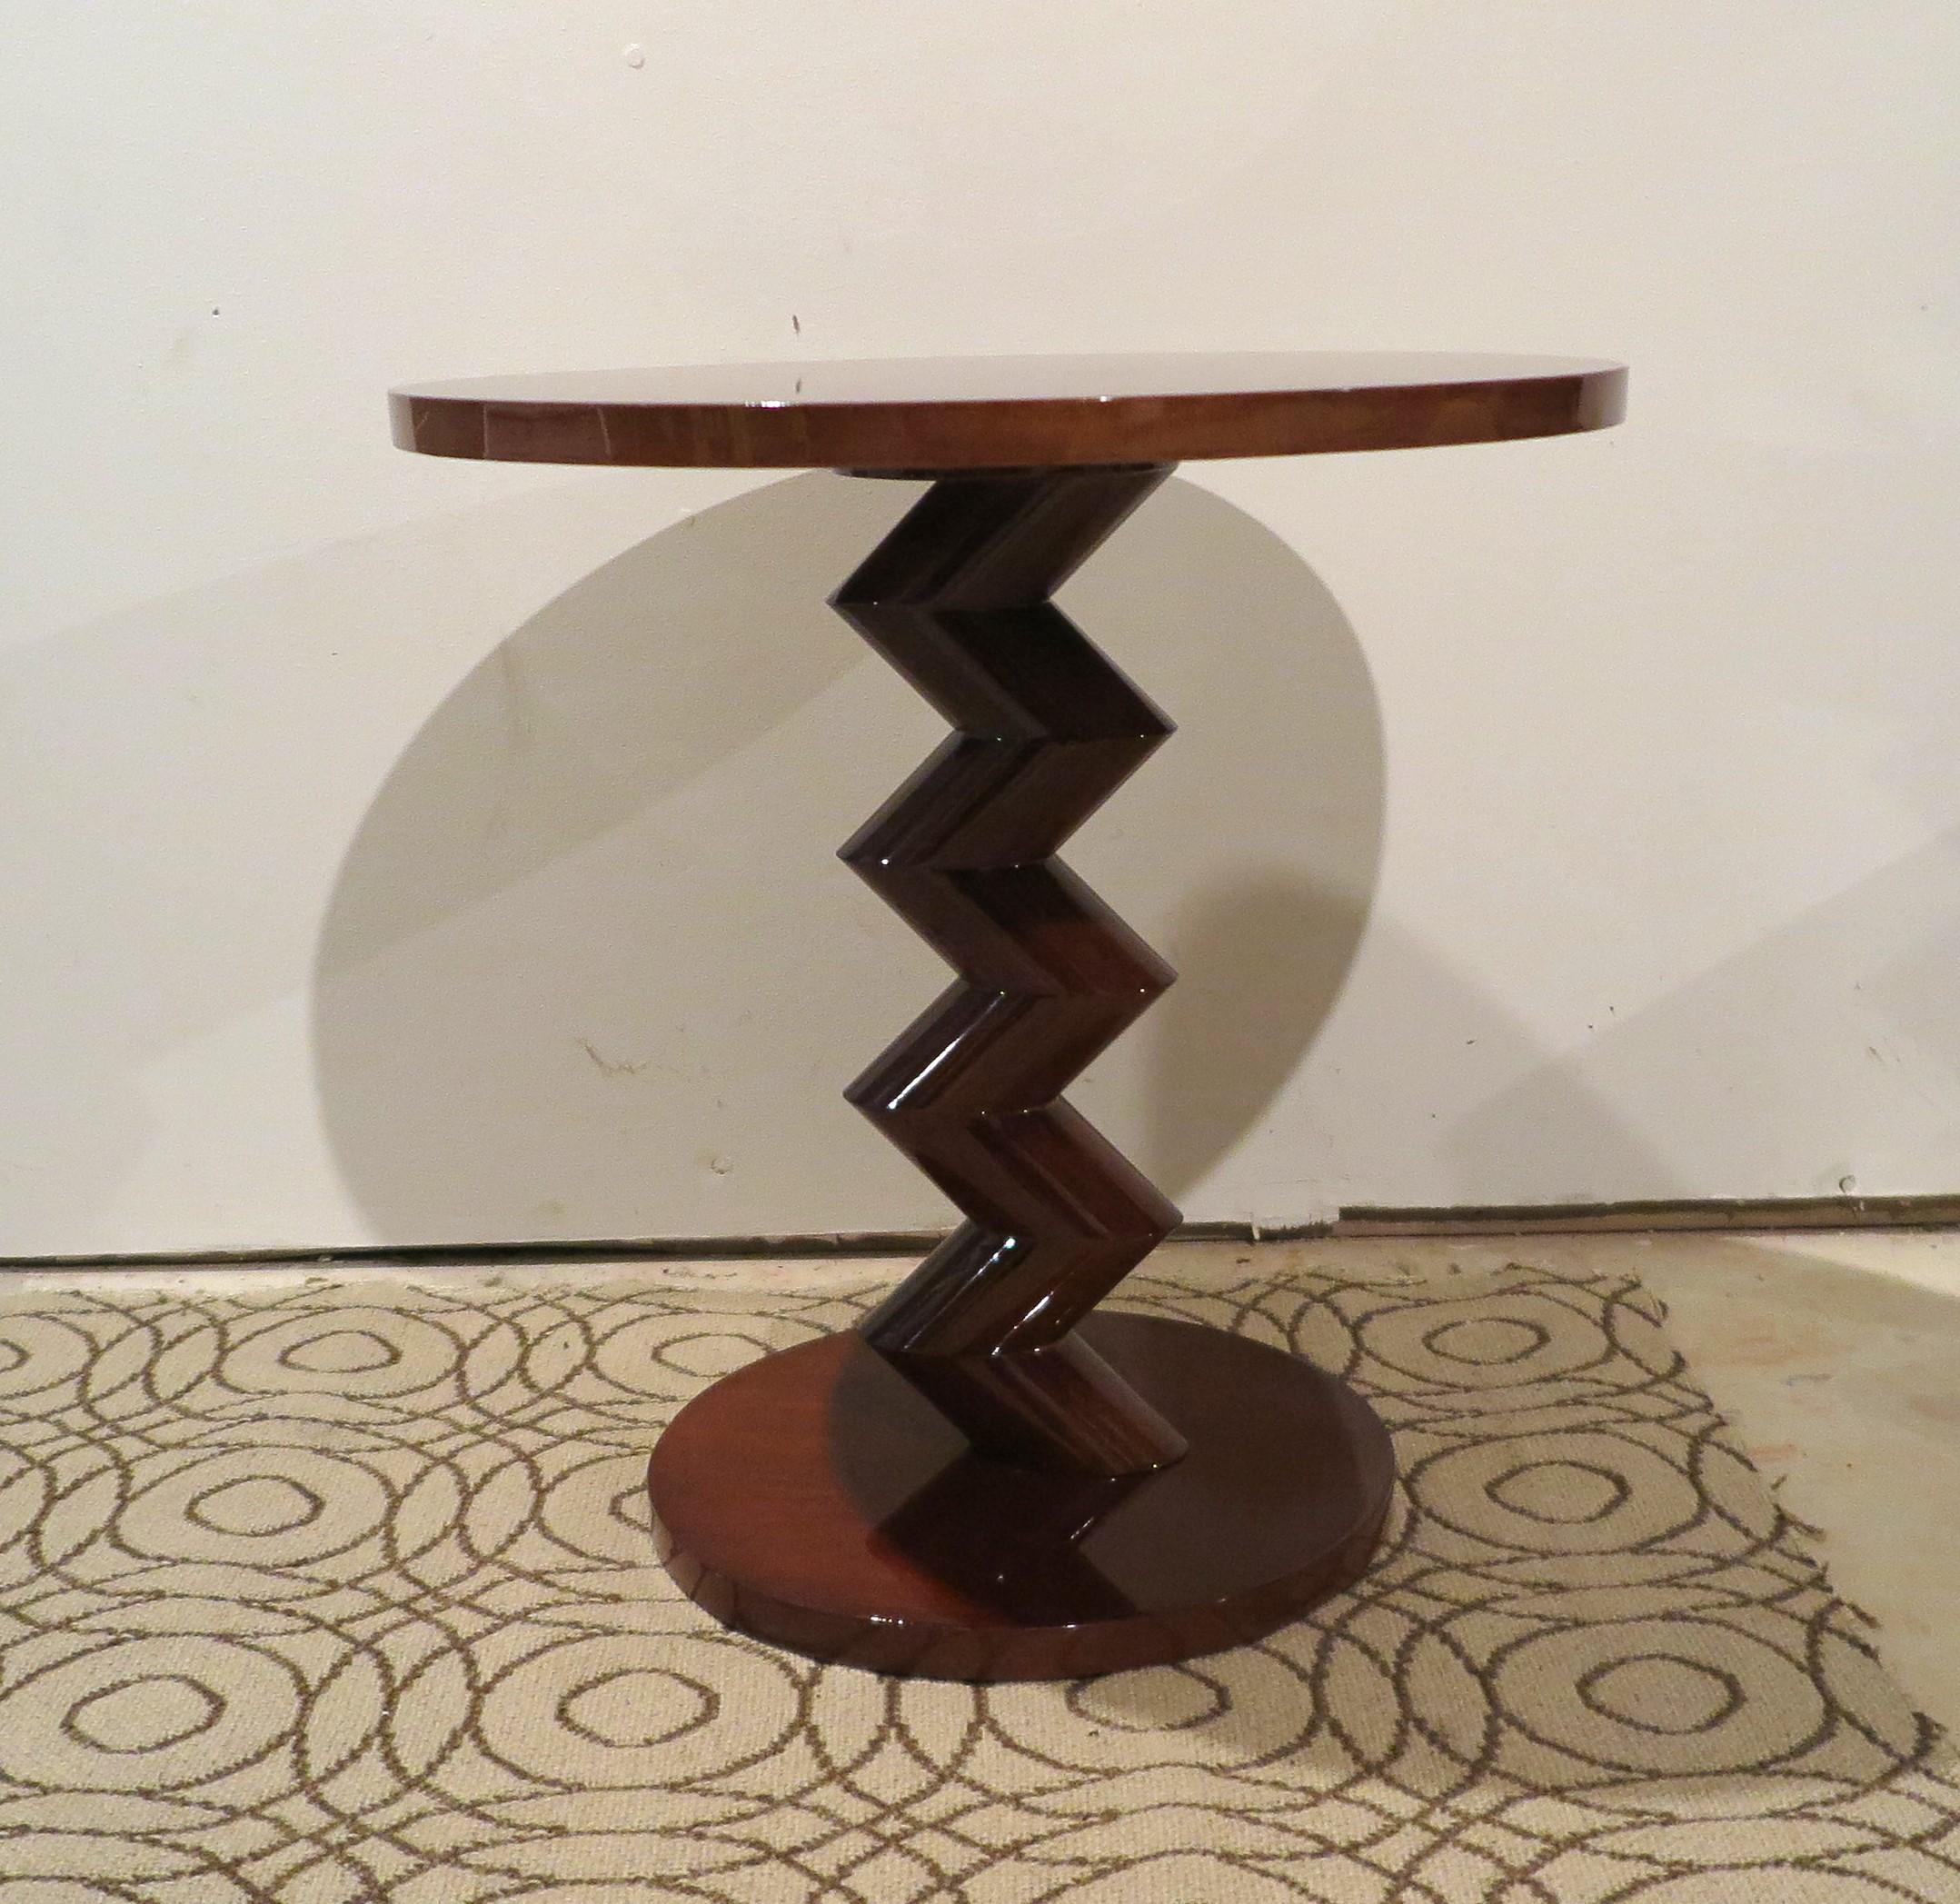 Elegant Vintage modern Side Table features features a modern zig-zag pedestal base.  Beautiful Mahogany in rich lacquer finish.  Table was purchased in 1996 and is in very good condition (like new).   Size is perfect for End or side table use can